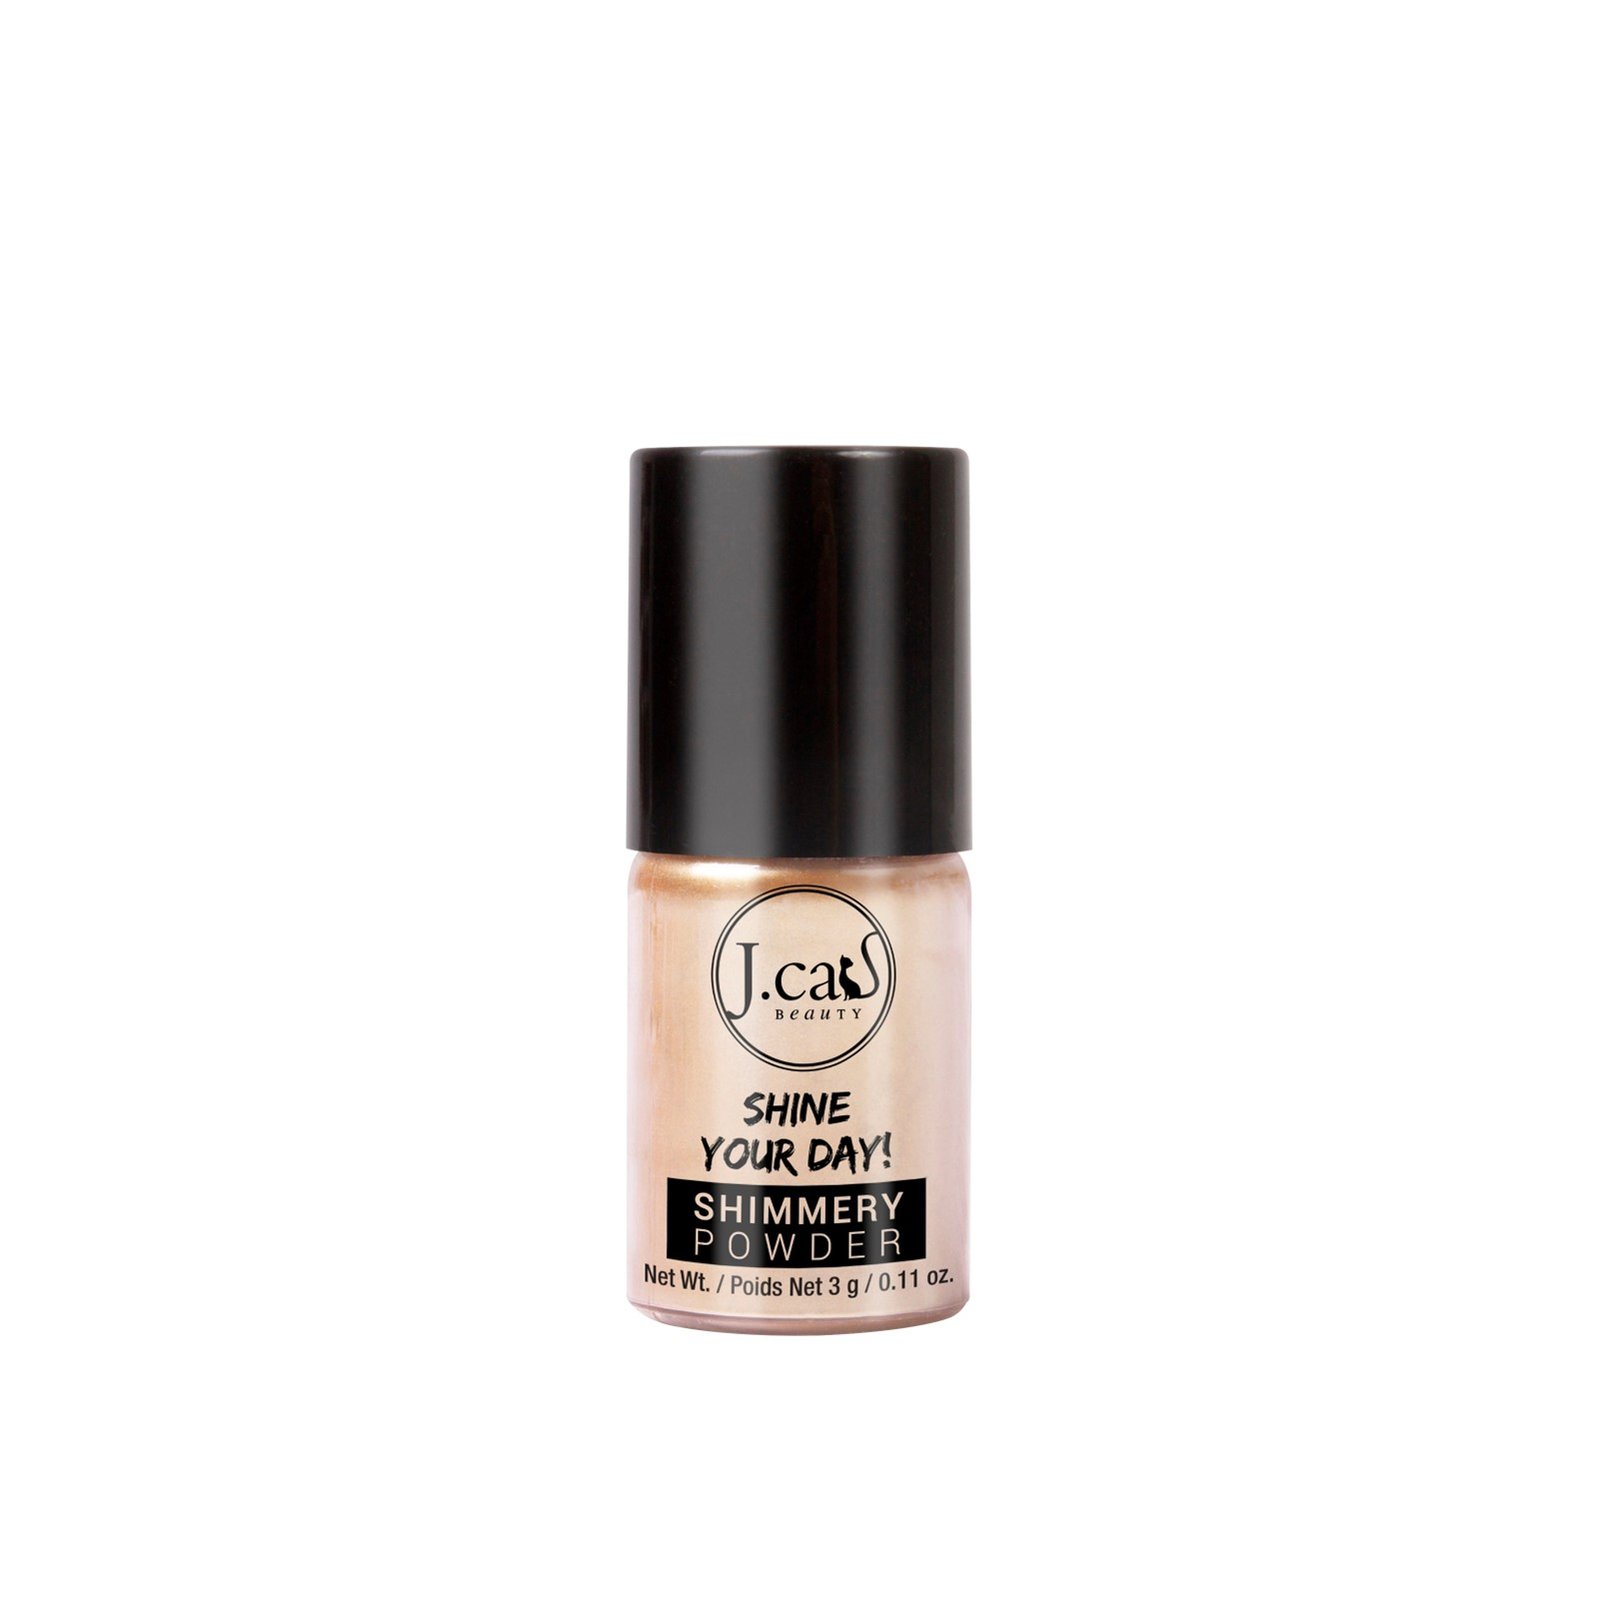 J.Cat Shine Your Day! Shimmery Powder